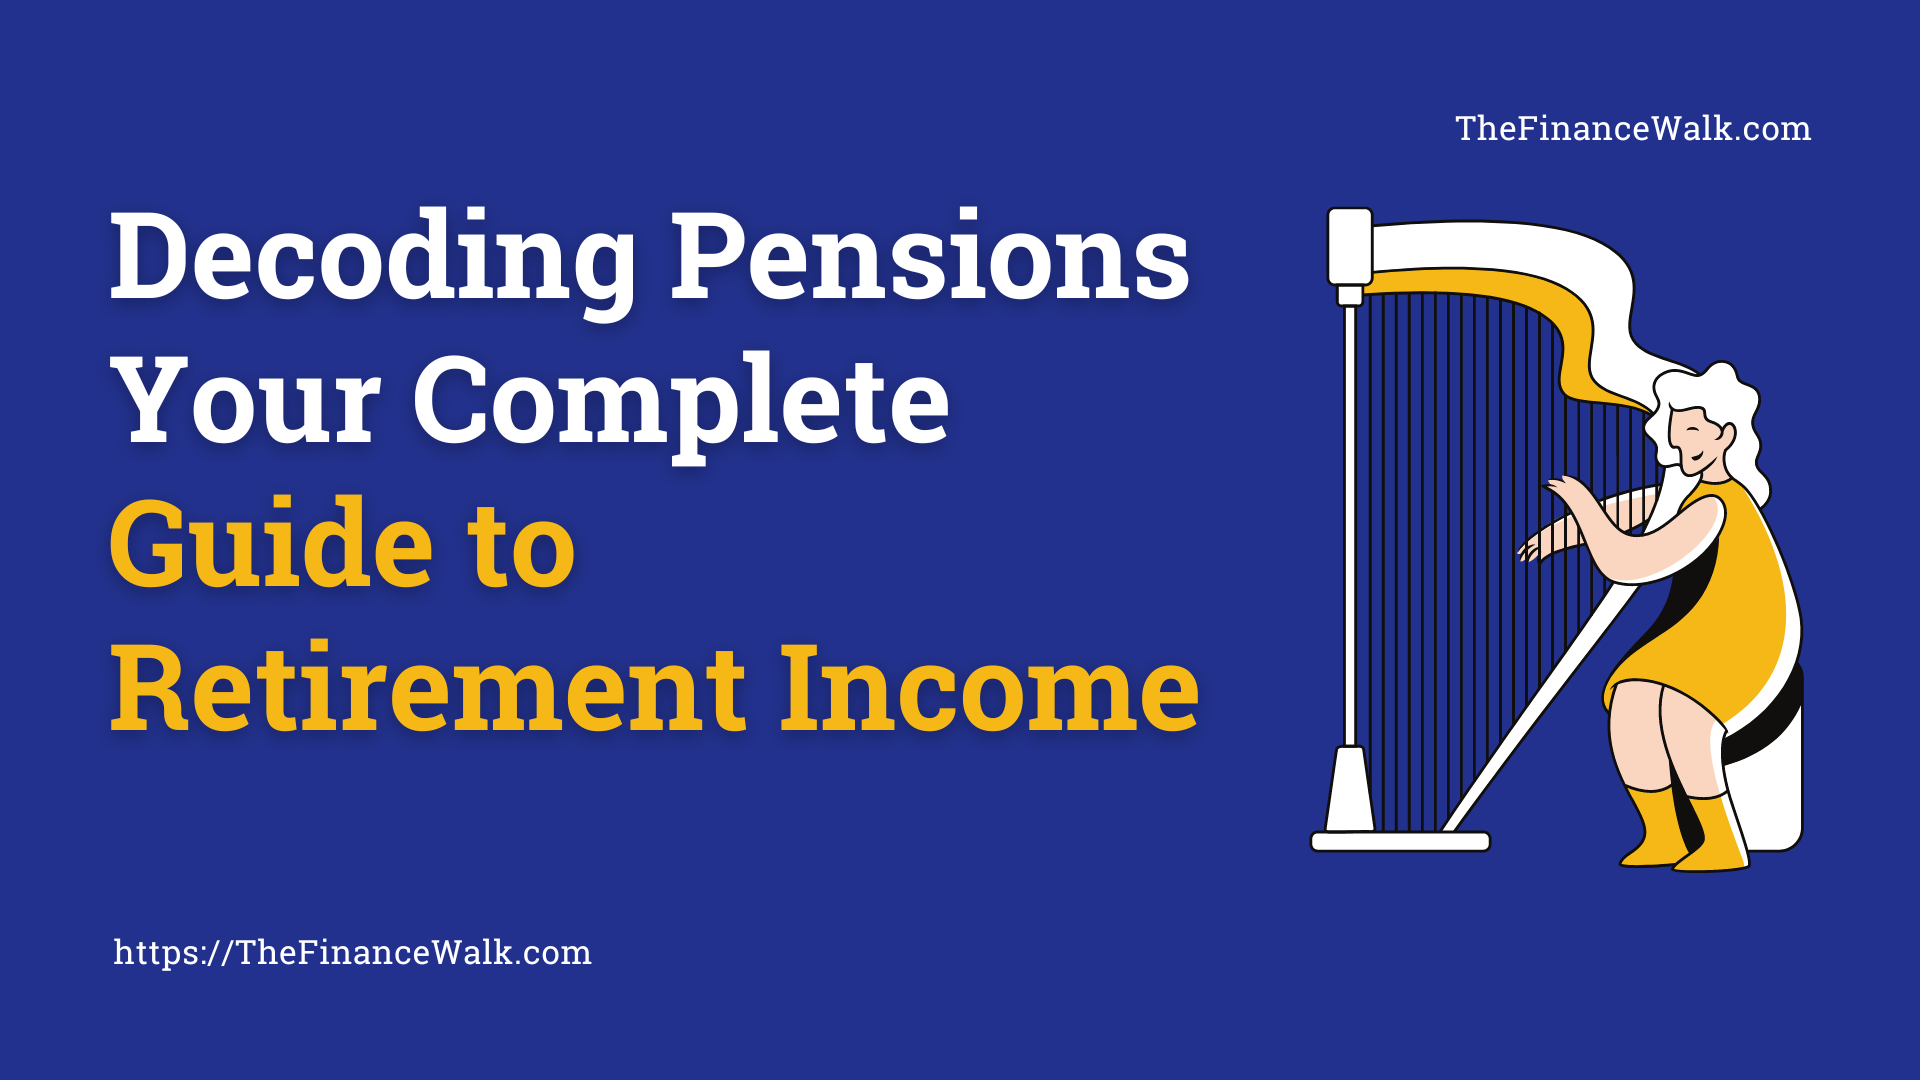 Decoding Pensions: Your Complete Guide to Retirement Income